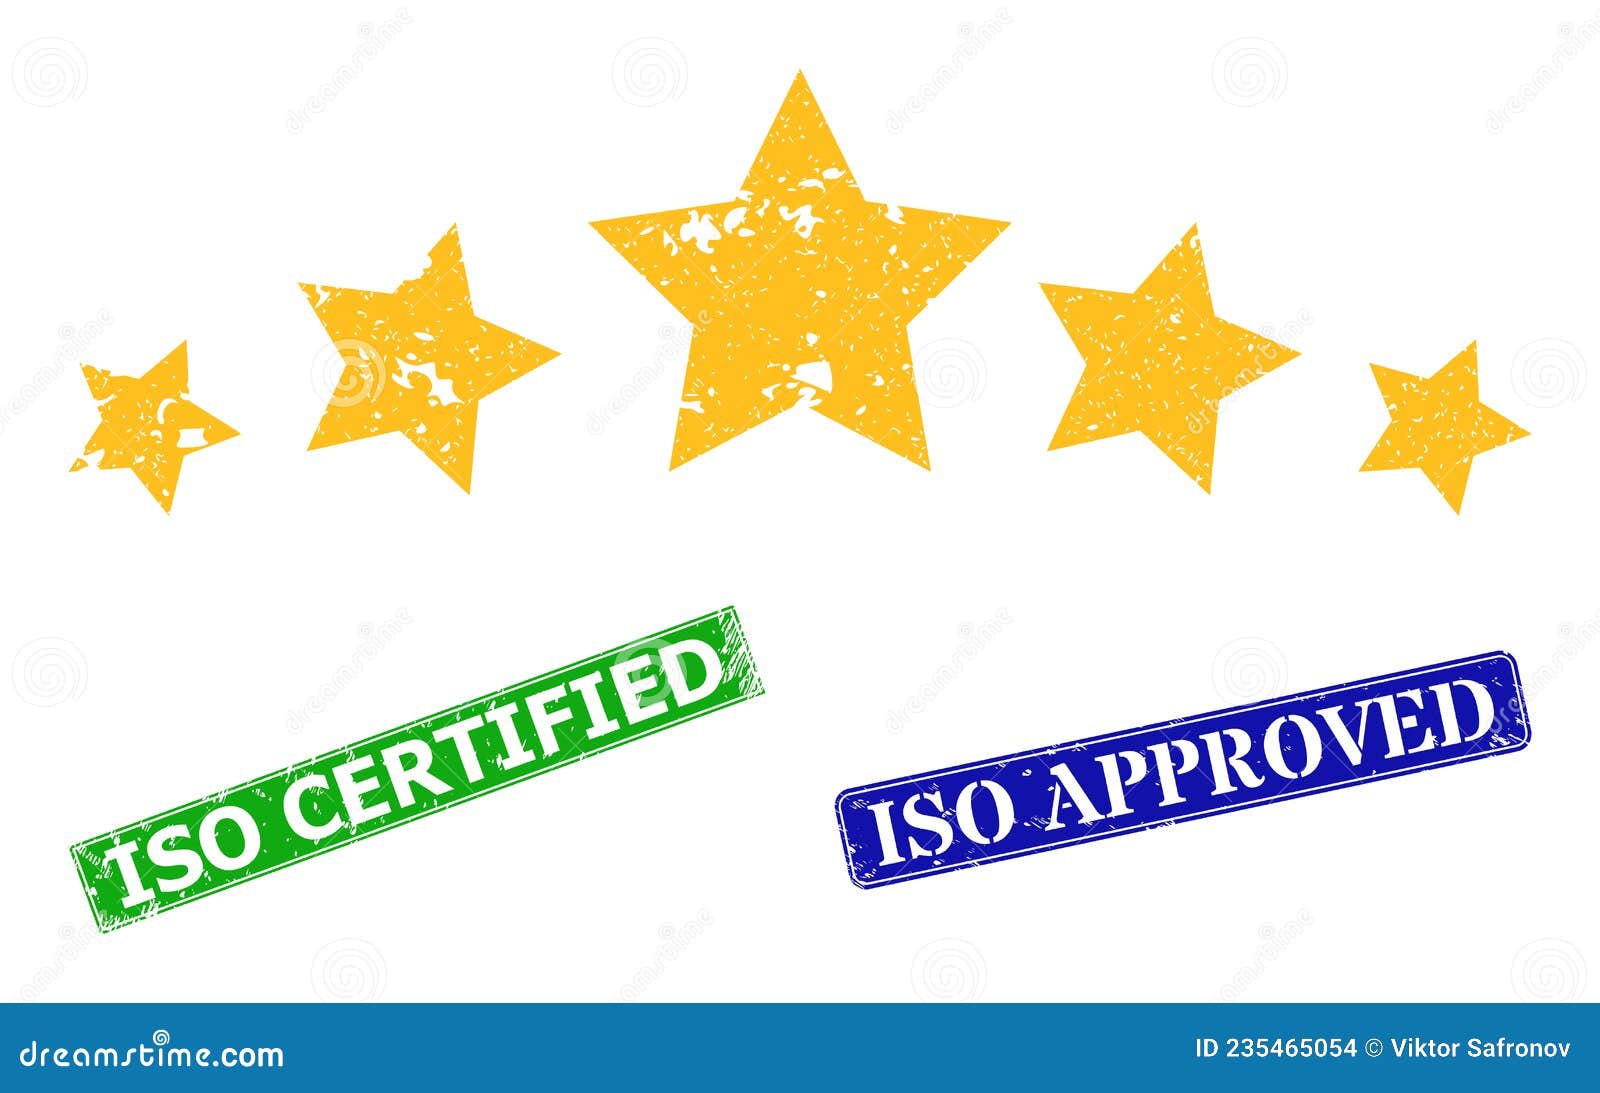 5 Star Rated-stamp, Stock vector